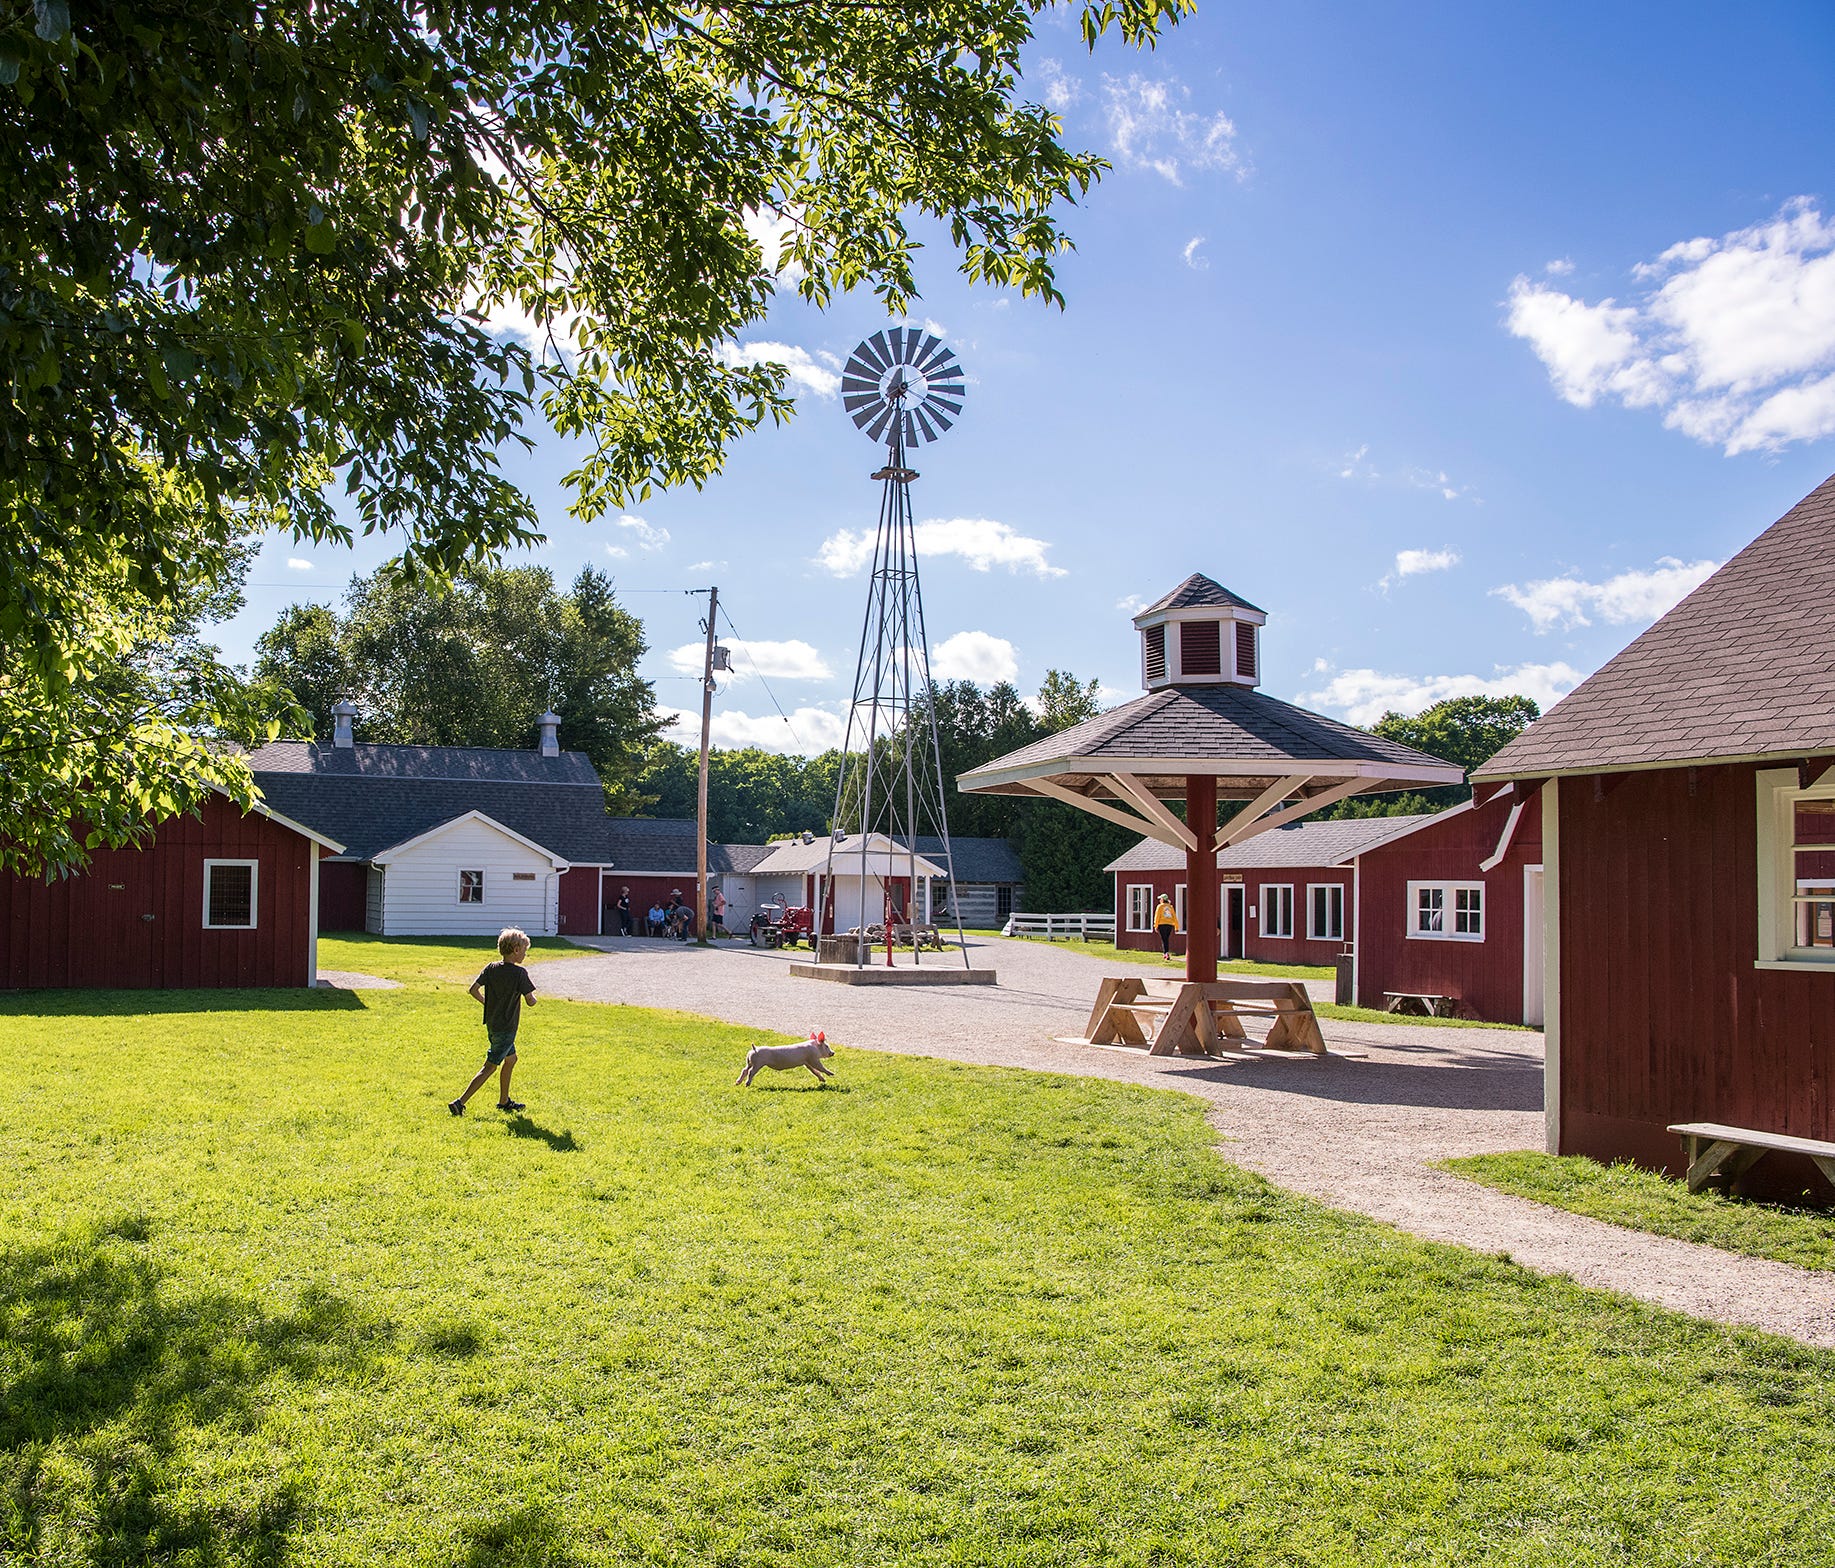 Chasing piglets and other baby animals is just one of the many joys you can experience at The Farm near Sturgeon Bay, Wis. The 40-acre property opened in 1965 with a mission of preserving rural American heritage.